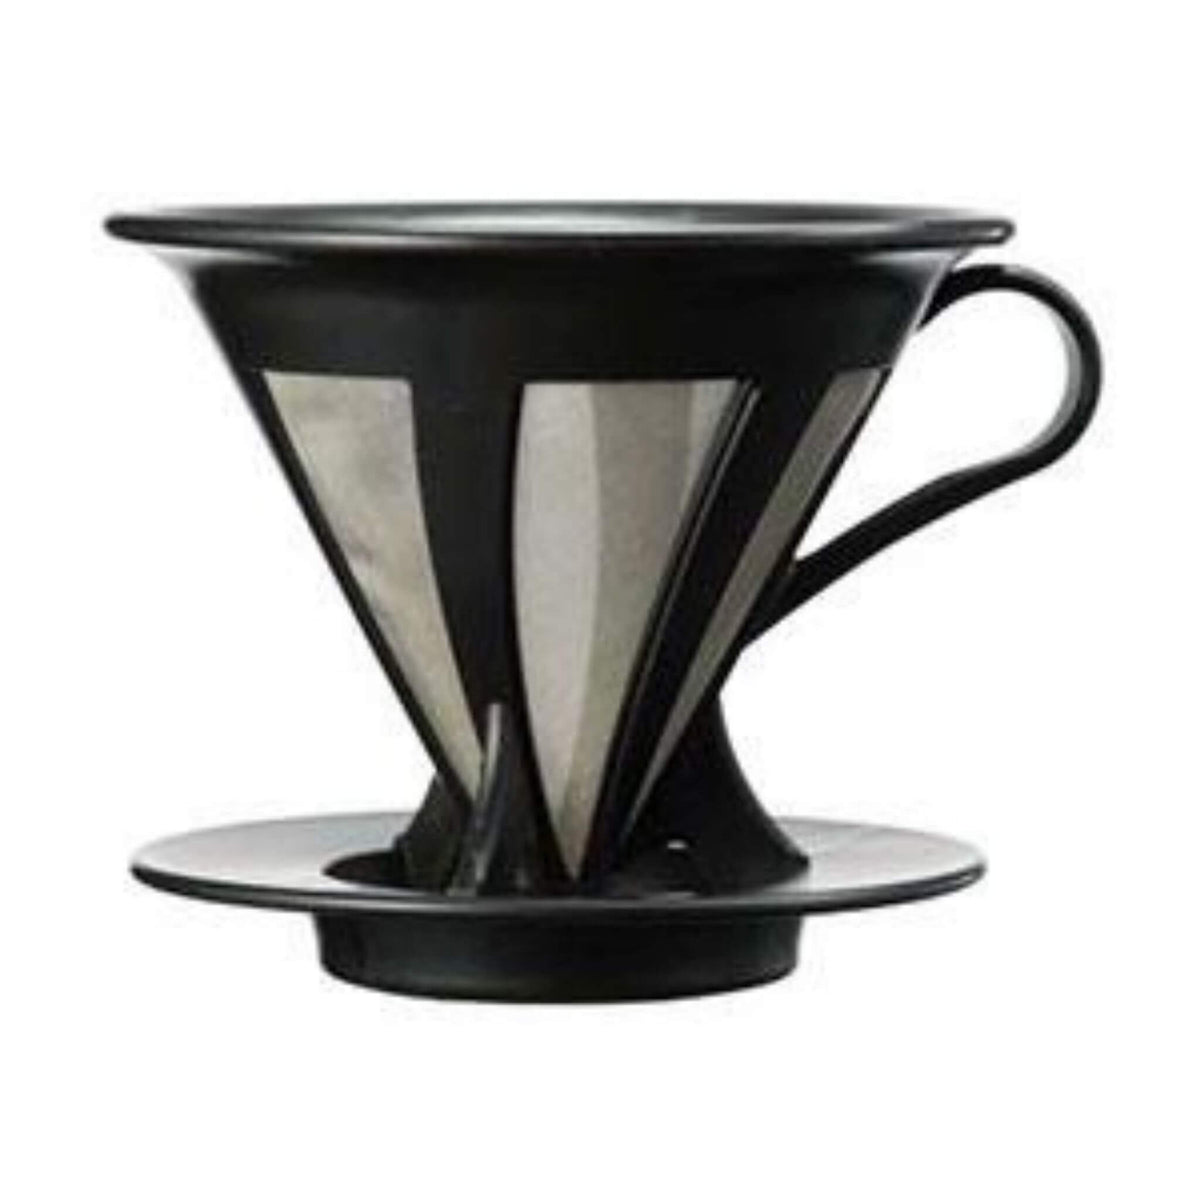 Front VIew Of Hario Mesh Pour Over Coffee Maker